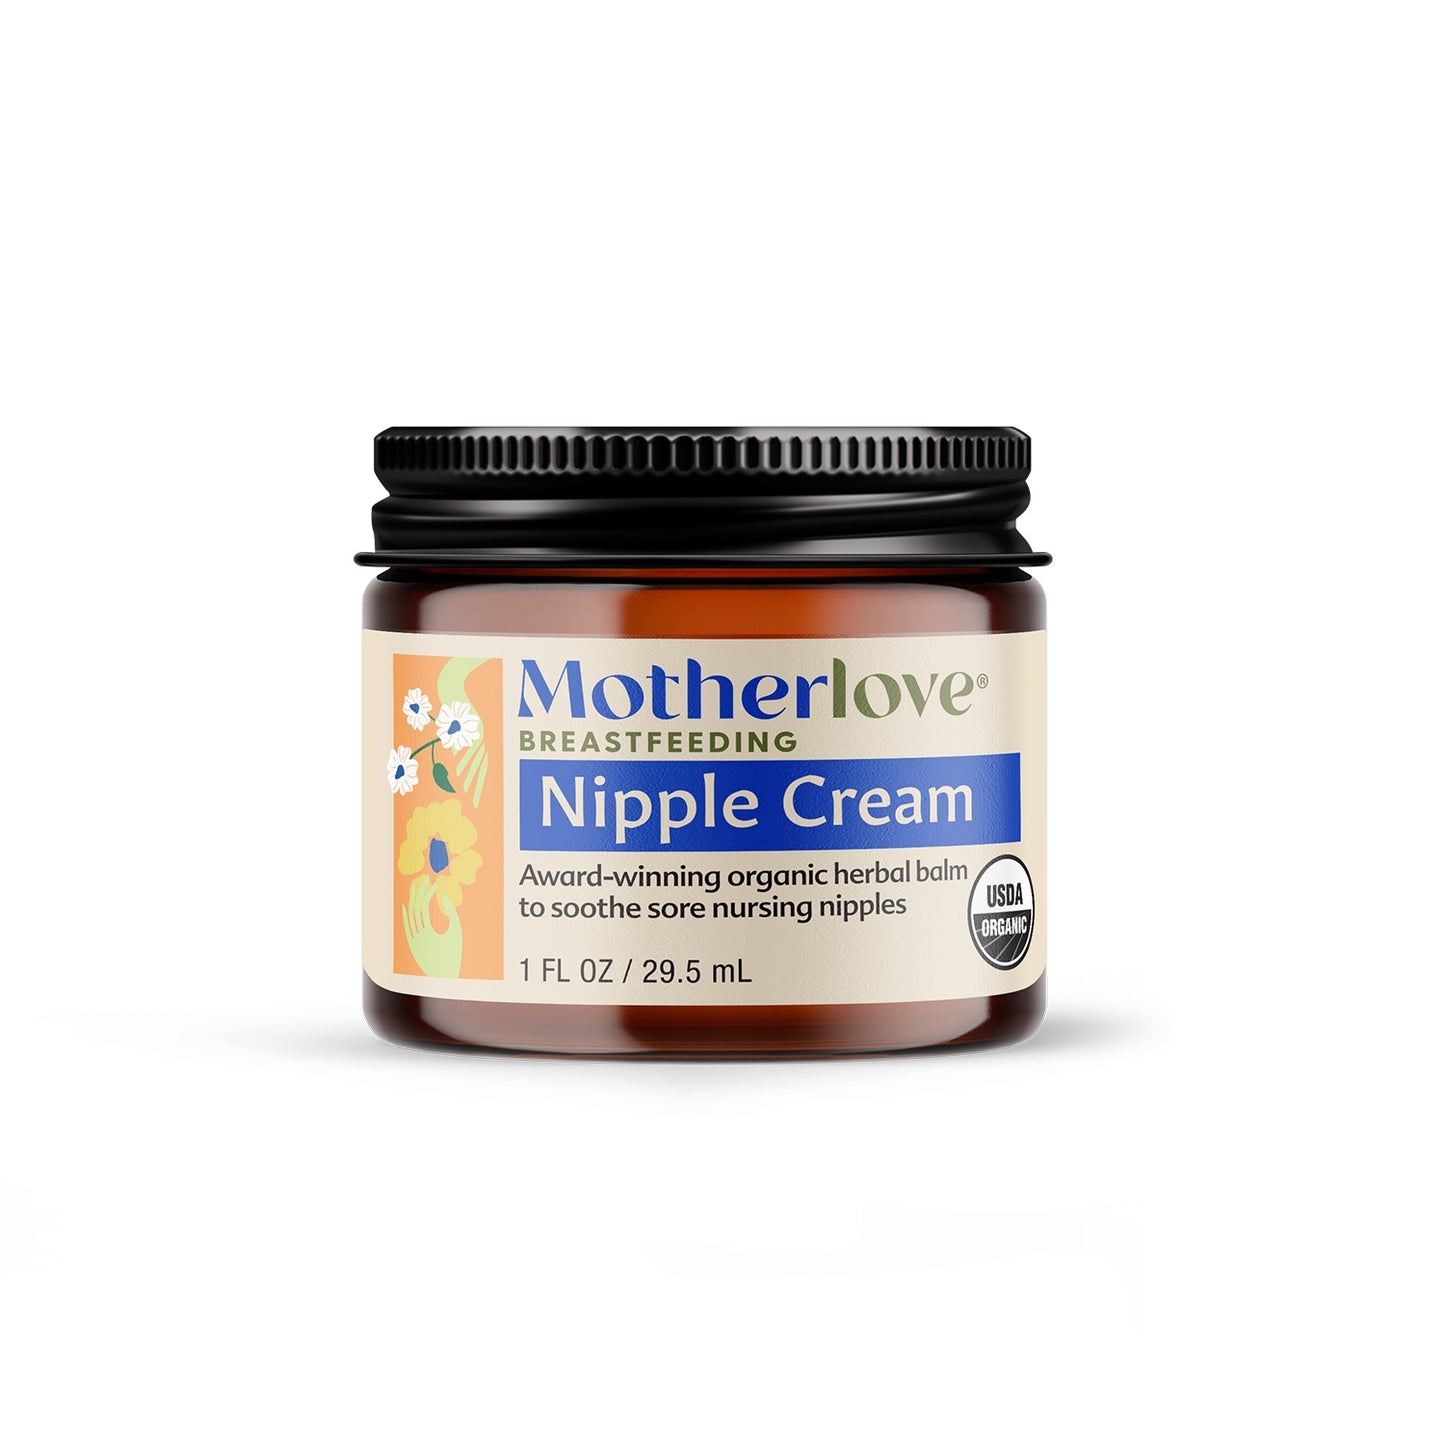 picture of a jar of nipple cream from motherlove